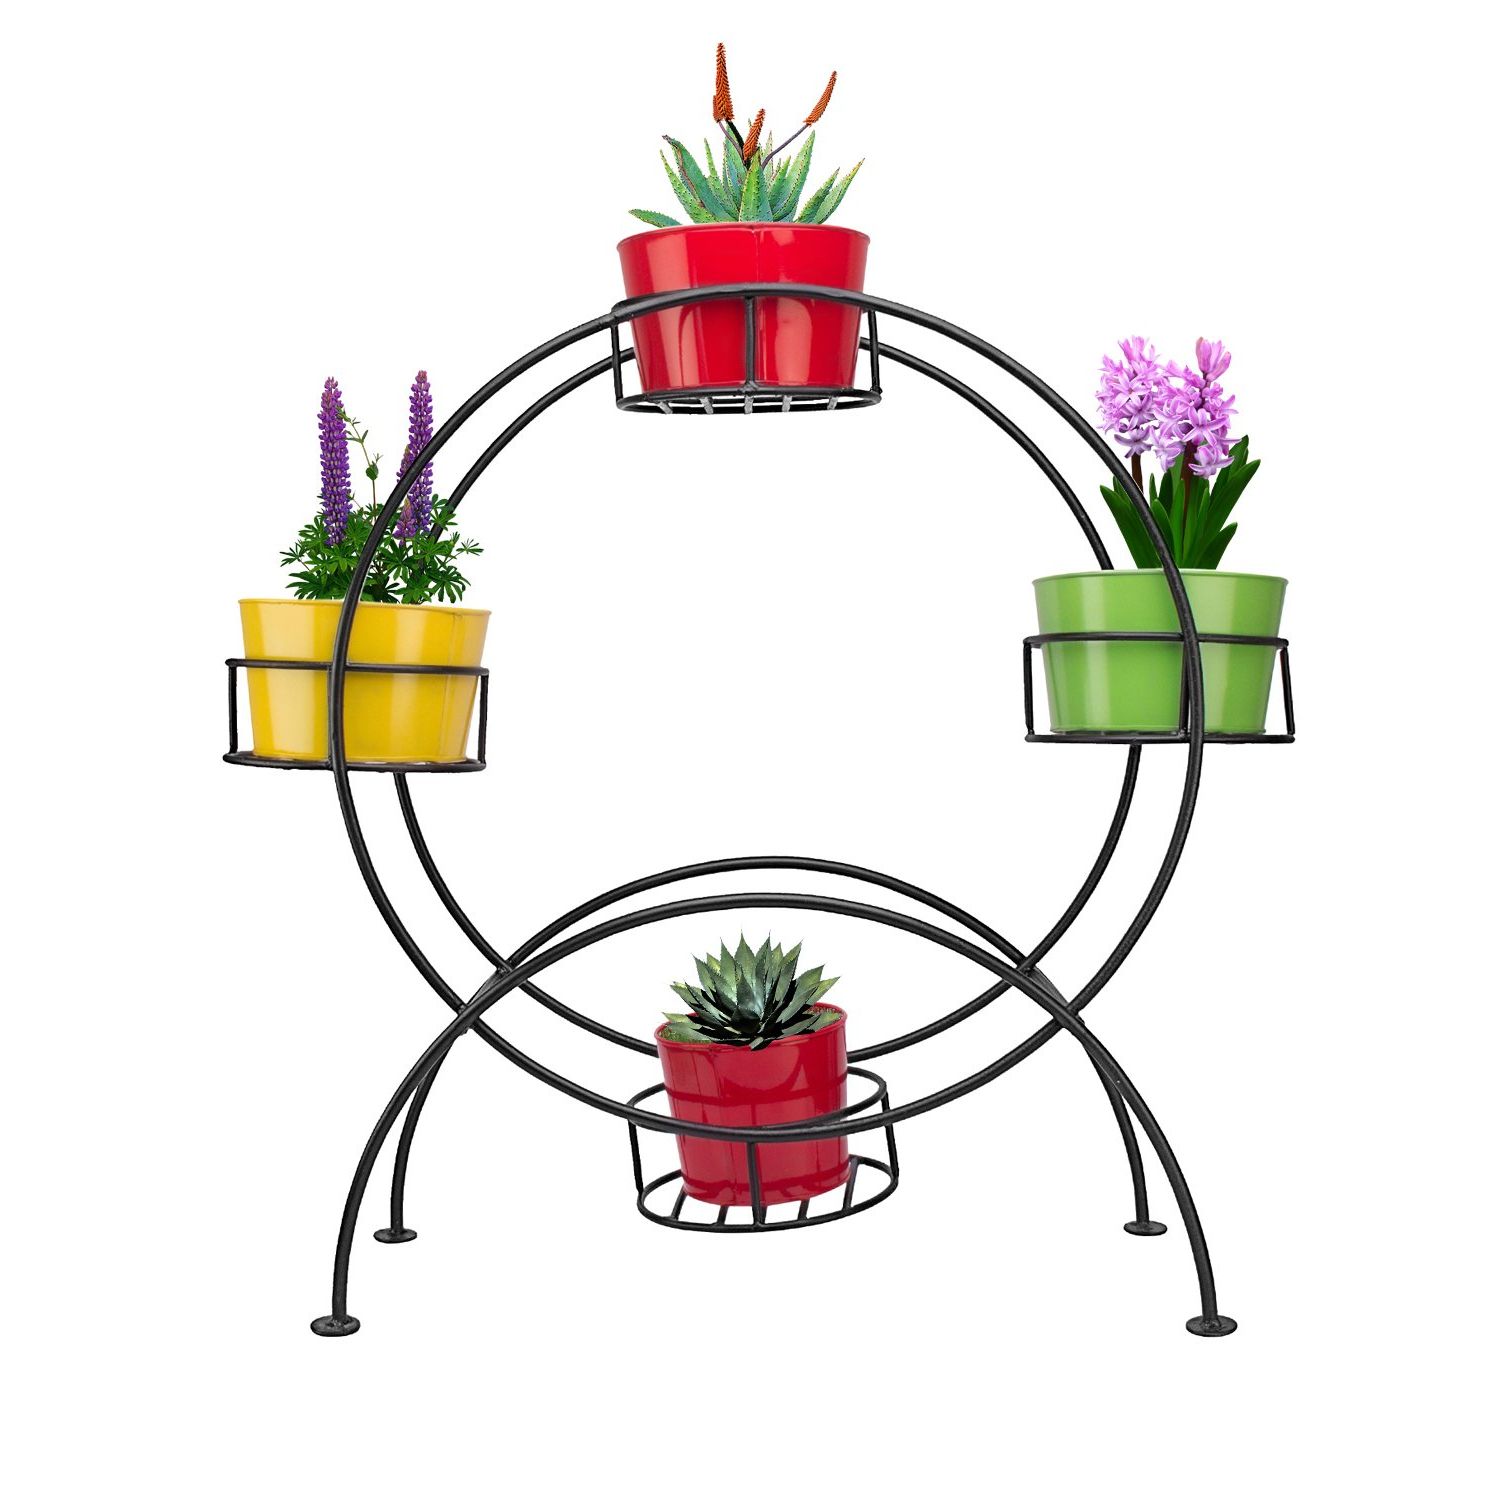 Nuha Metal Round Planter Stand With Pots, Black, Height  71 Cm, Width  26  Cm And Length  77 Cm, Pot Size  22.5 Cm, 1 Piece : Amazon (View 5 of 10)